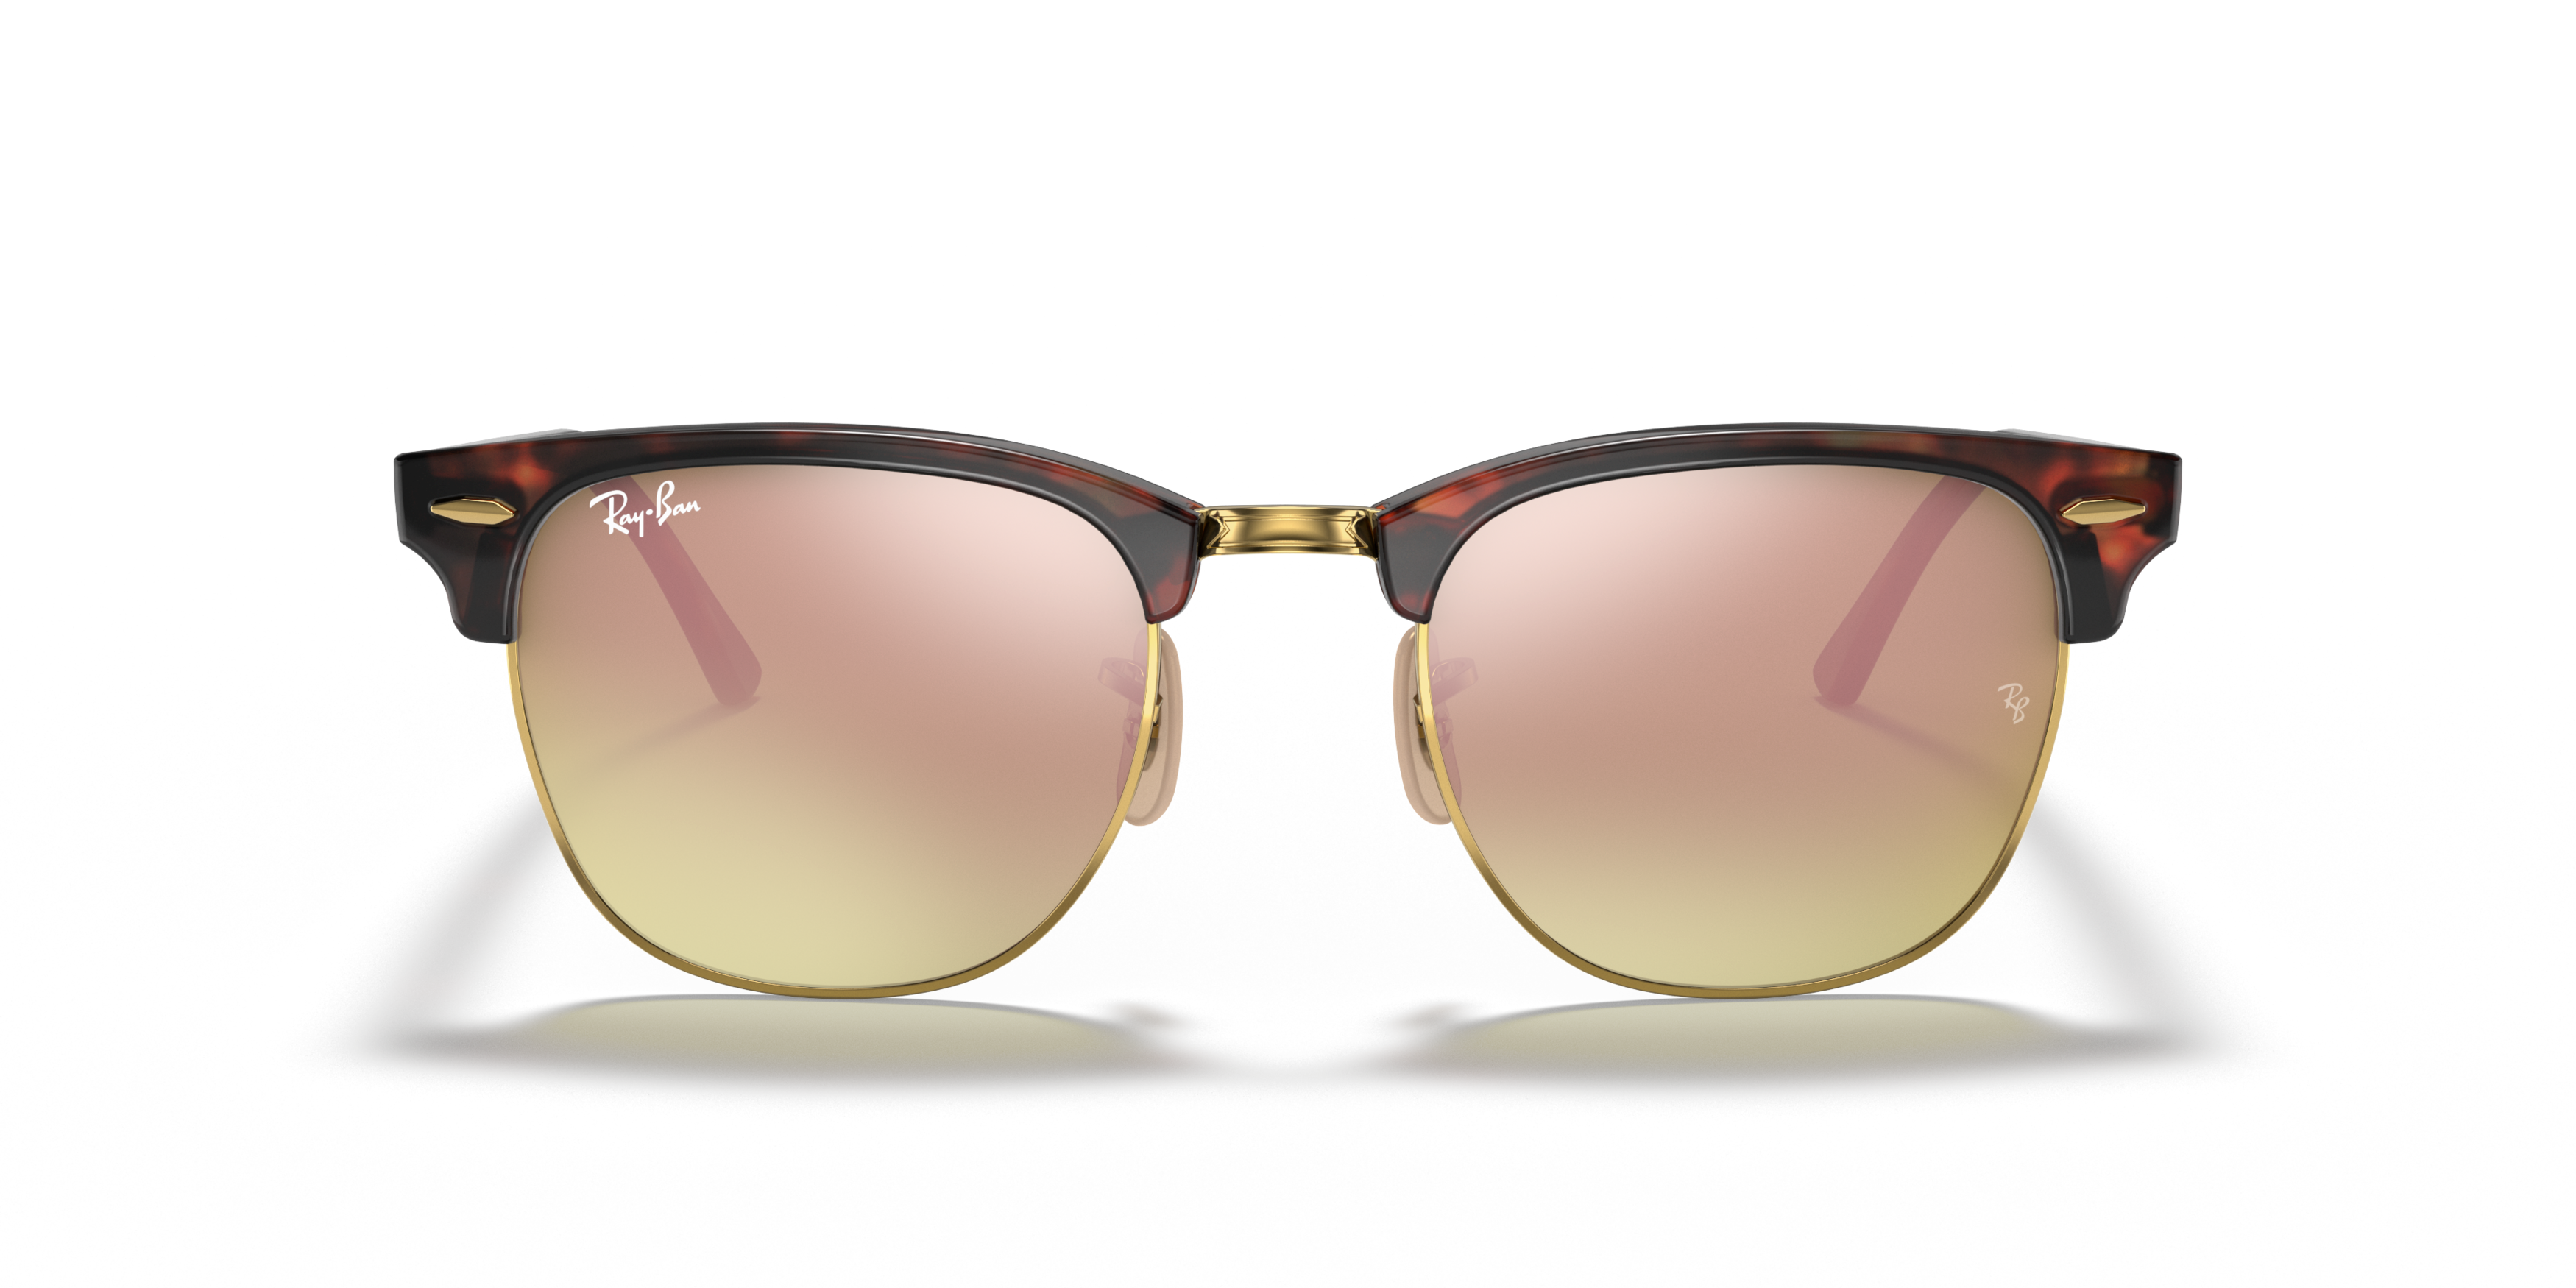 Front Ray-Ban Clubmaster RB 3016 Sunglasses Pink / Gold